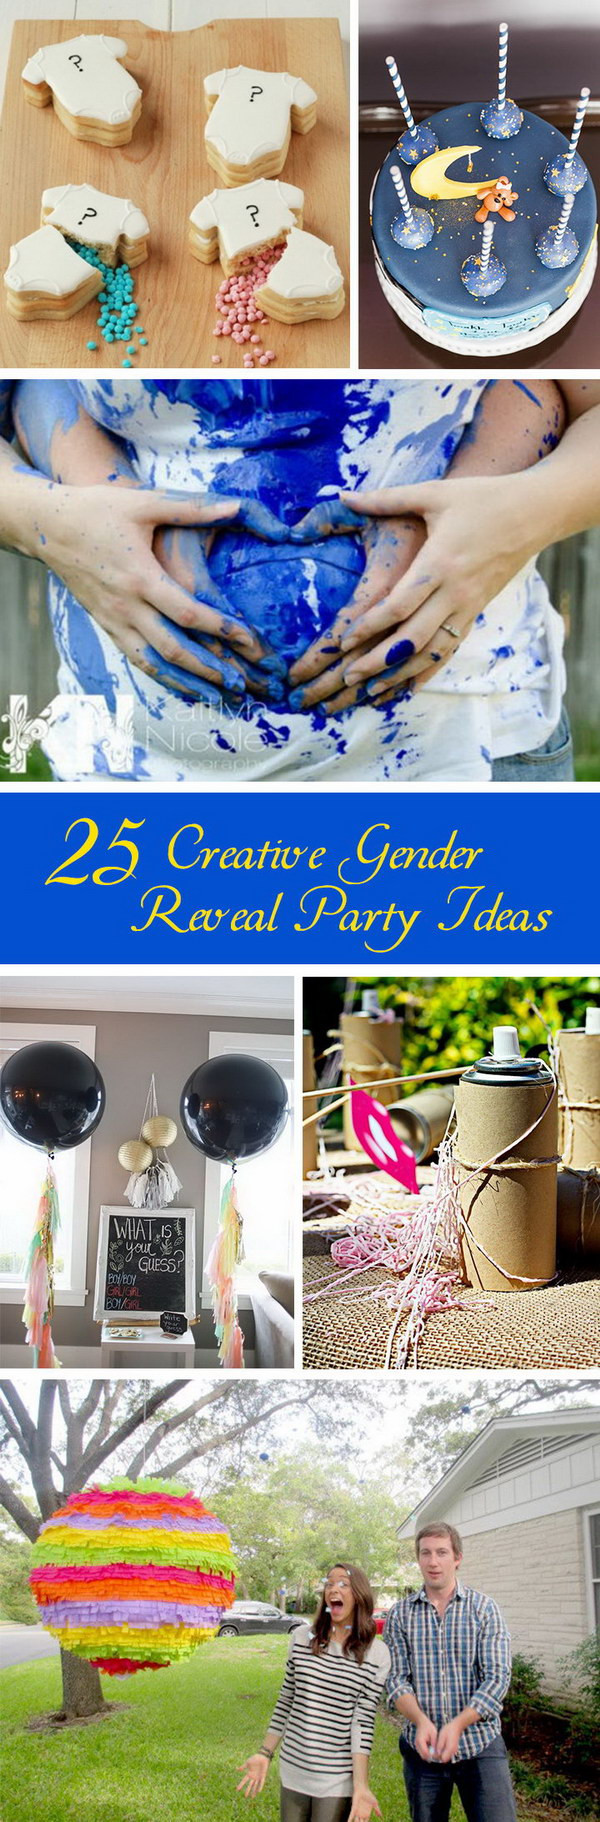 Reveal Gender Party Ideas
 25 Creative Gender Reveal Party Ideas Hative